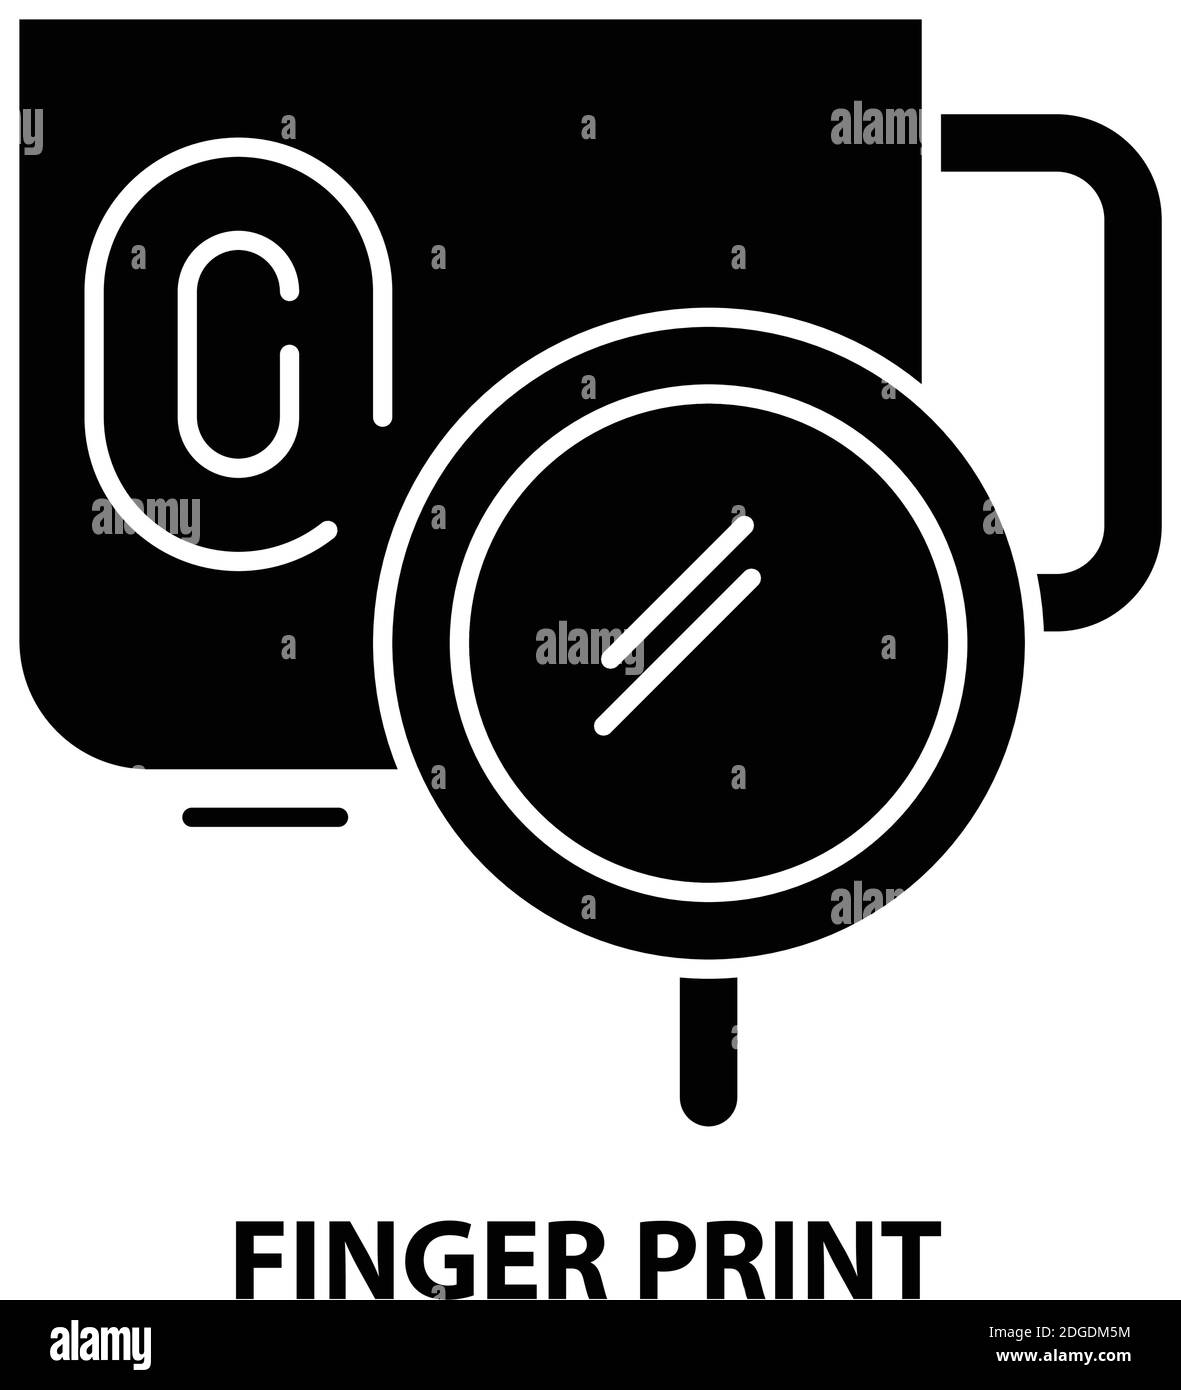 finger print icon, black vector sign with editable strokes, concept illustration Stock Vector